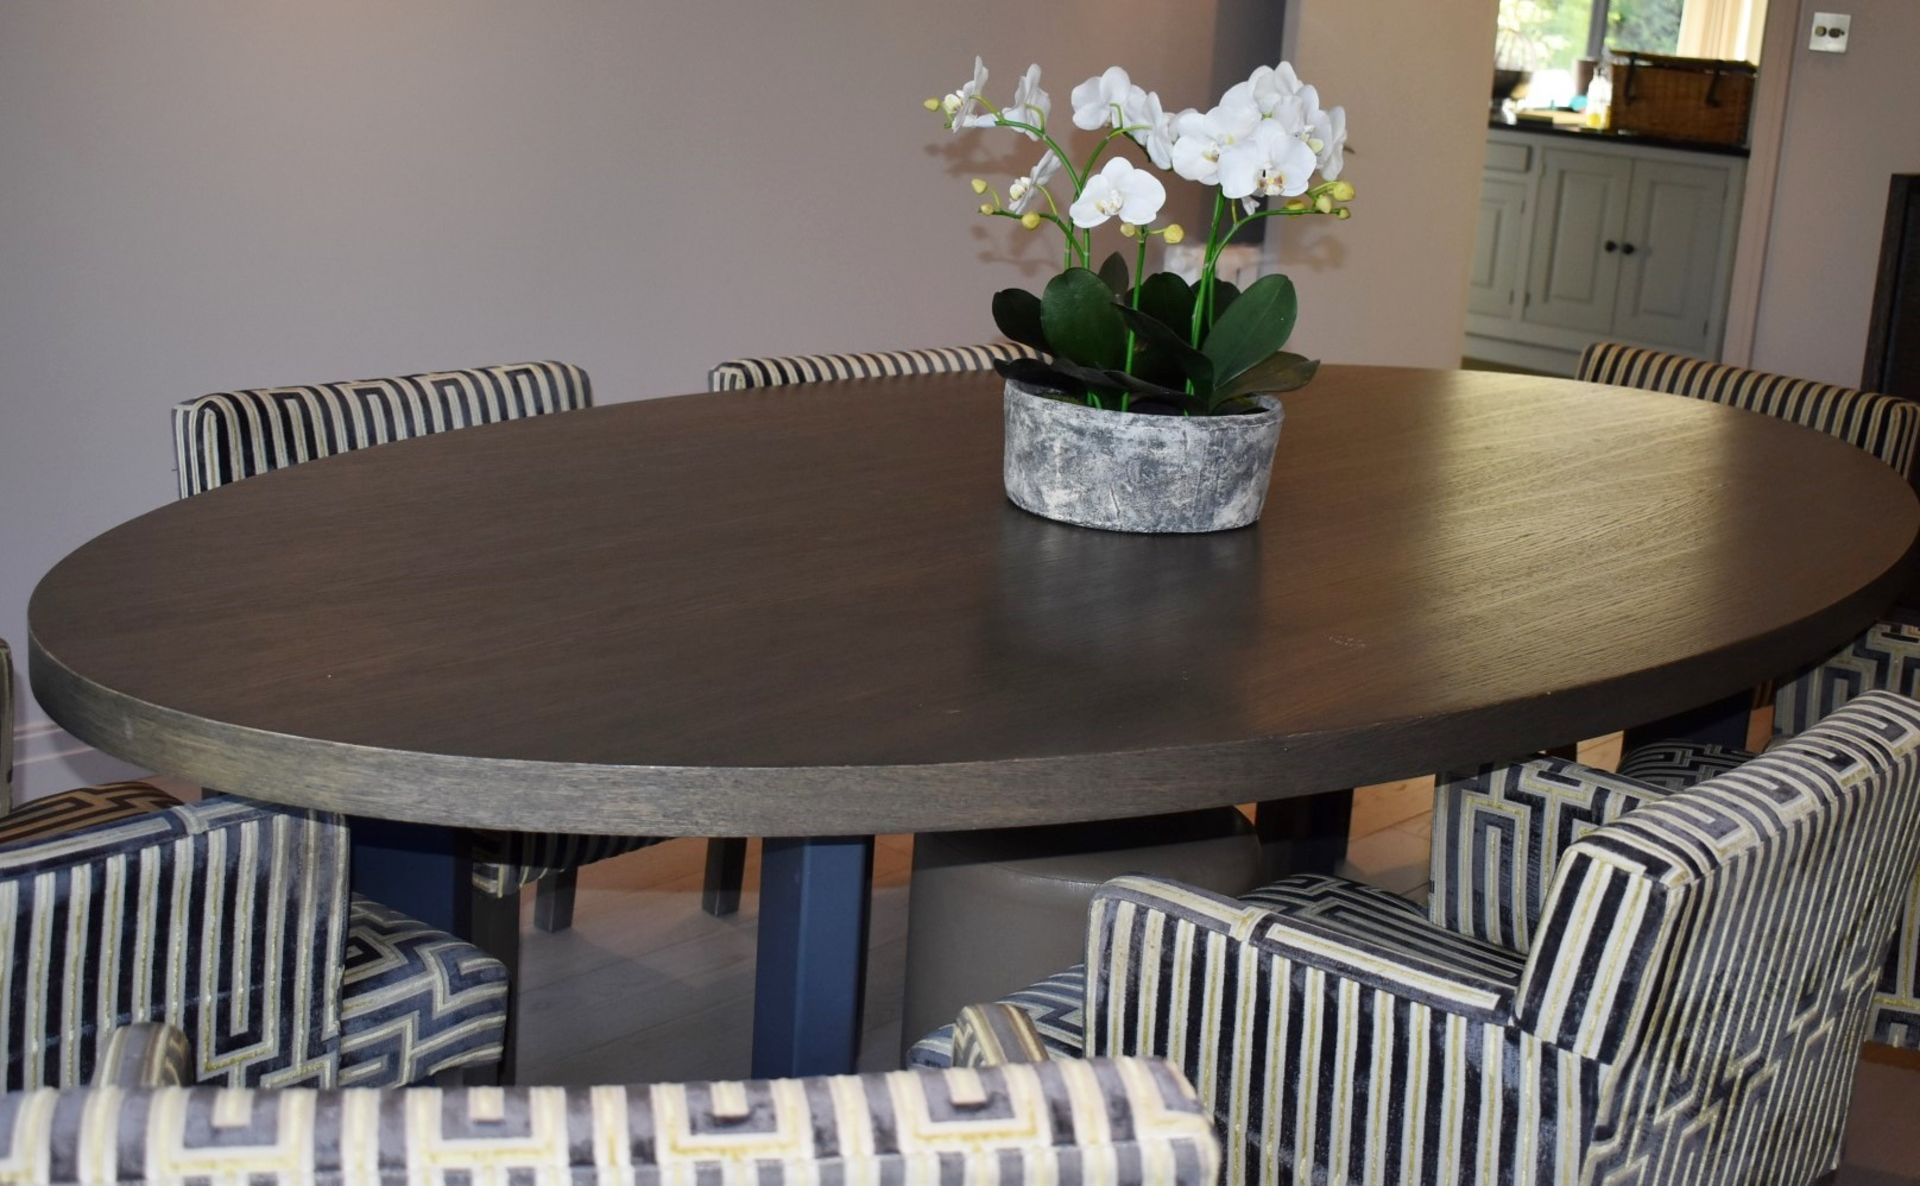 1 x Oval Dining Table With A Limed Oak Finish And Metal Legs - Image 4 of 5